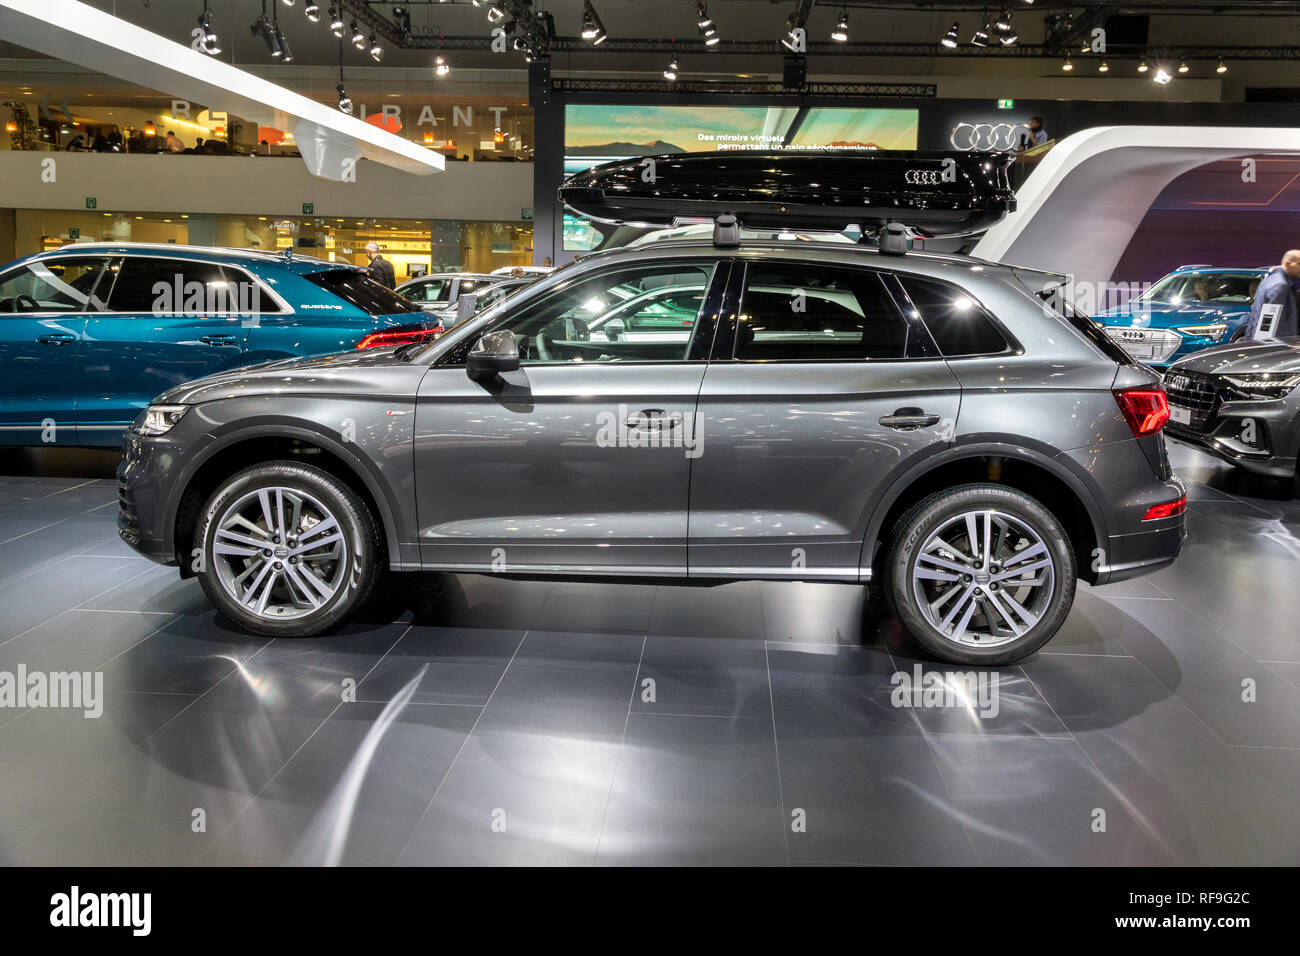 BRUSSELS - JAN 18, 2019: Audi Q5 compact luxury crossover SUV car showcased at the 97th Brussels Motor Show 2019 Autosalon. Stock Photo